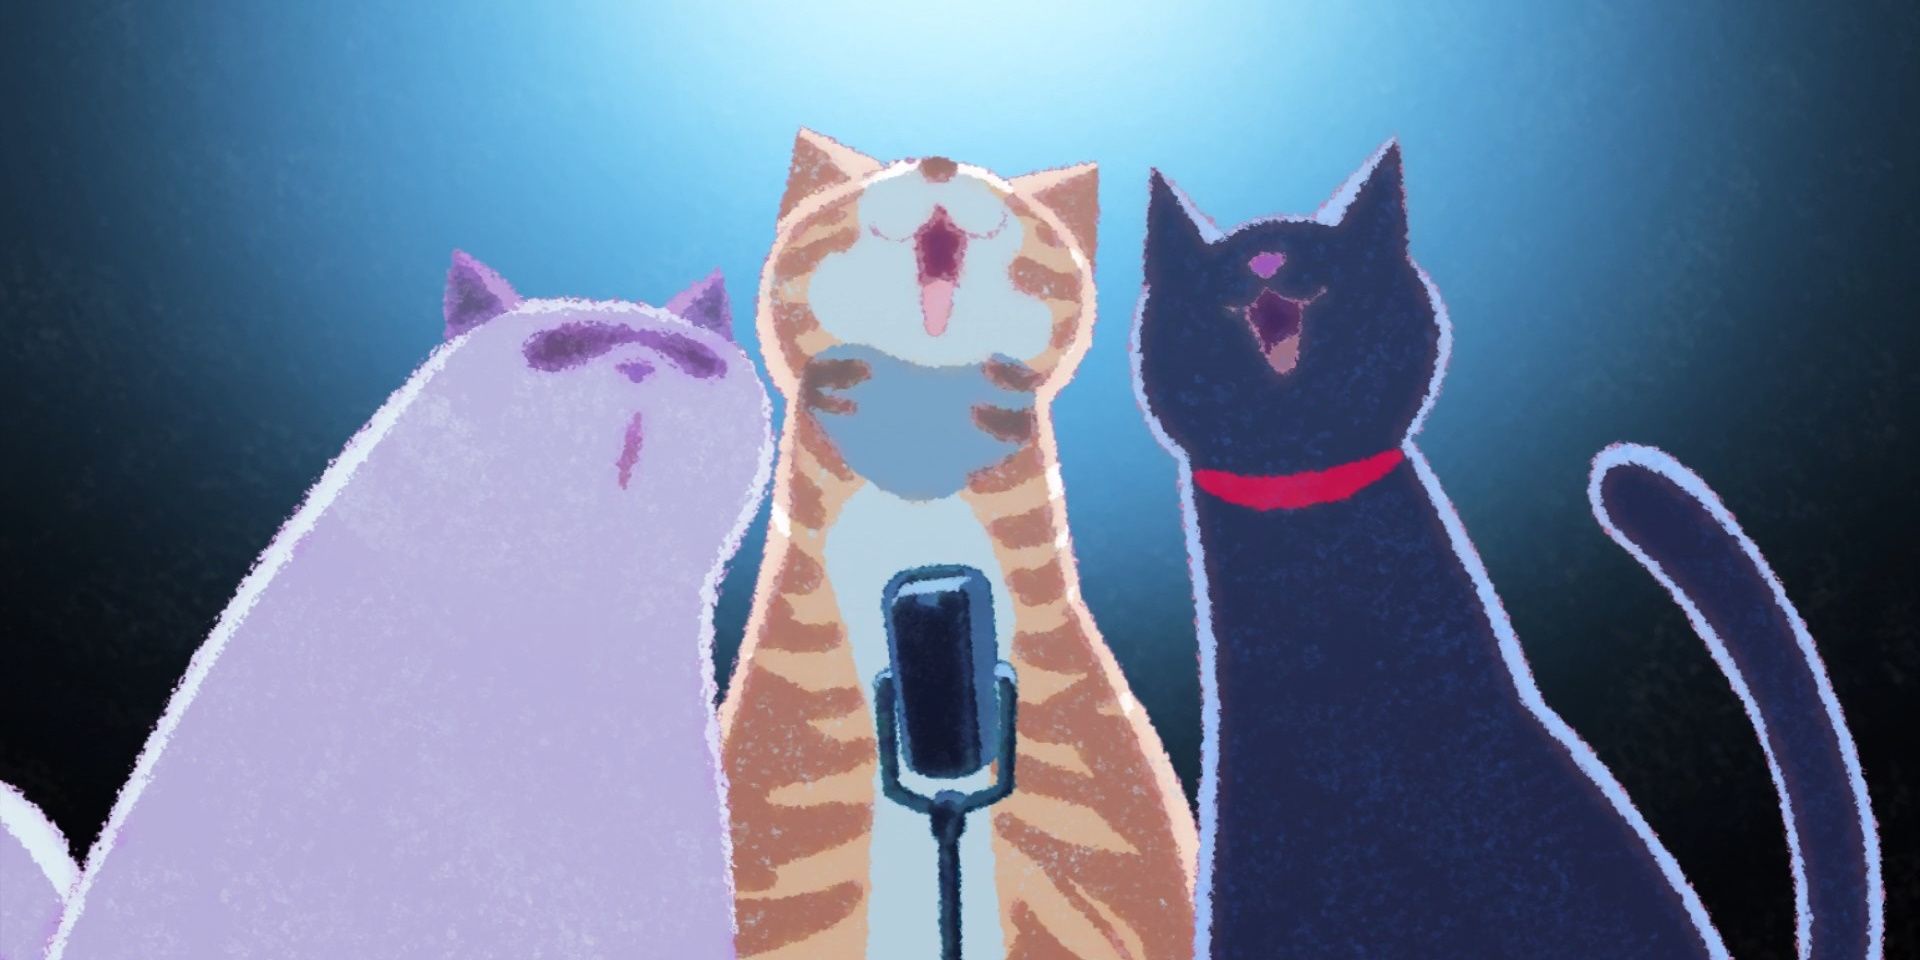 Three cats sing in front of a microphone, from Great Pretender's ending, which uses Freddy Mercury's The Great Pretender